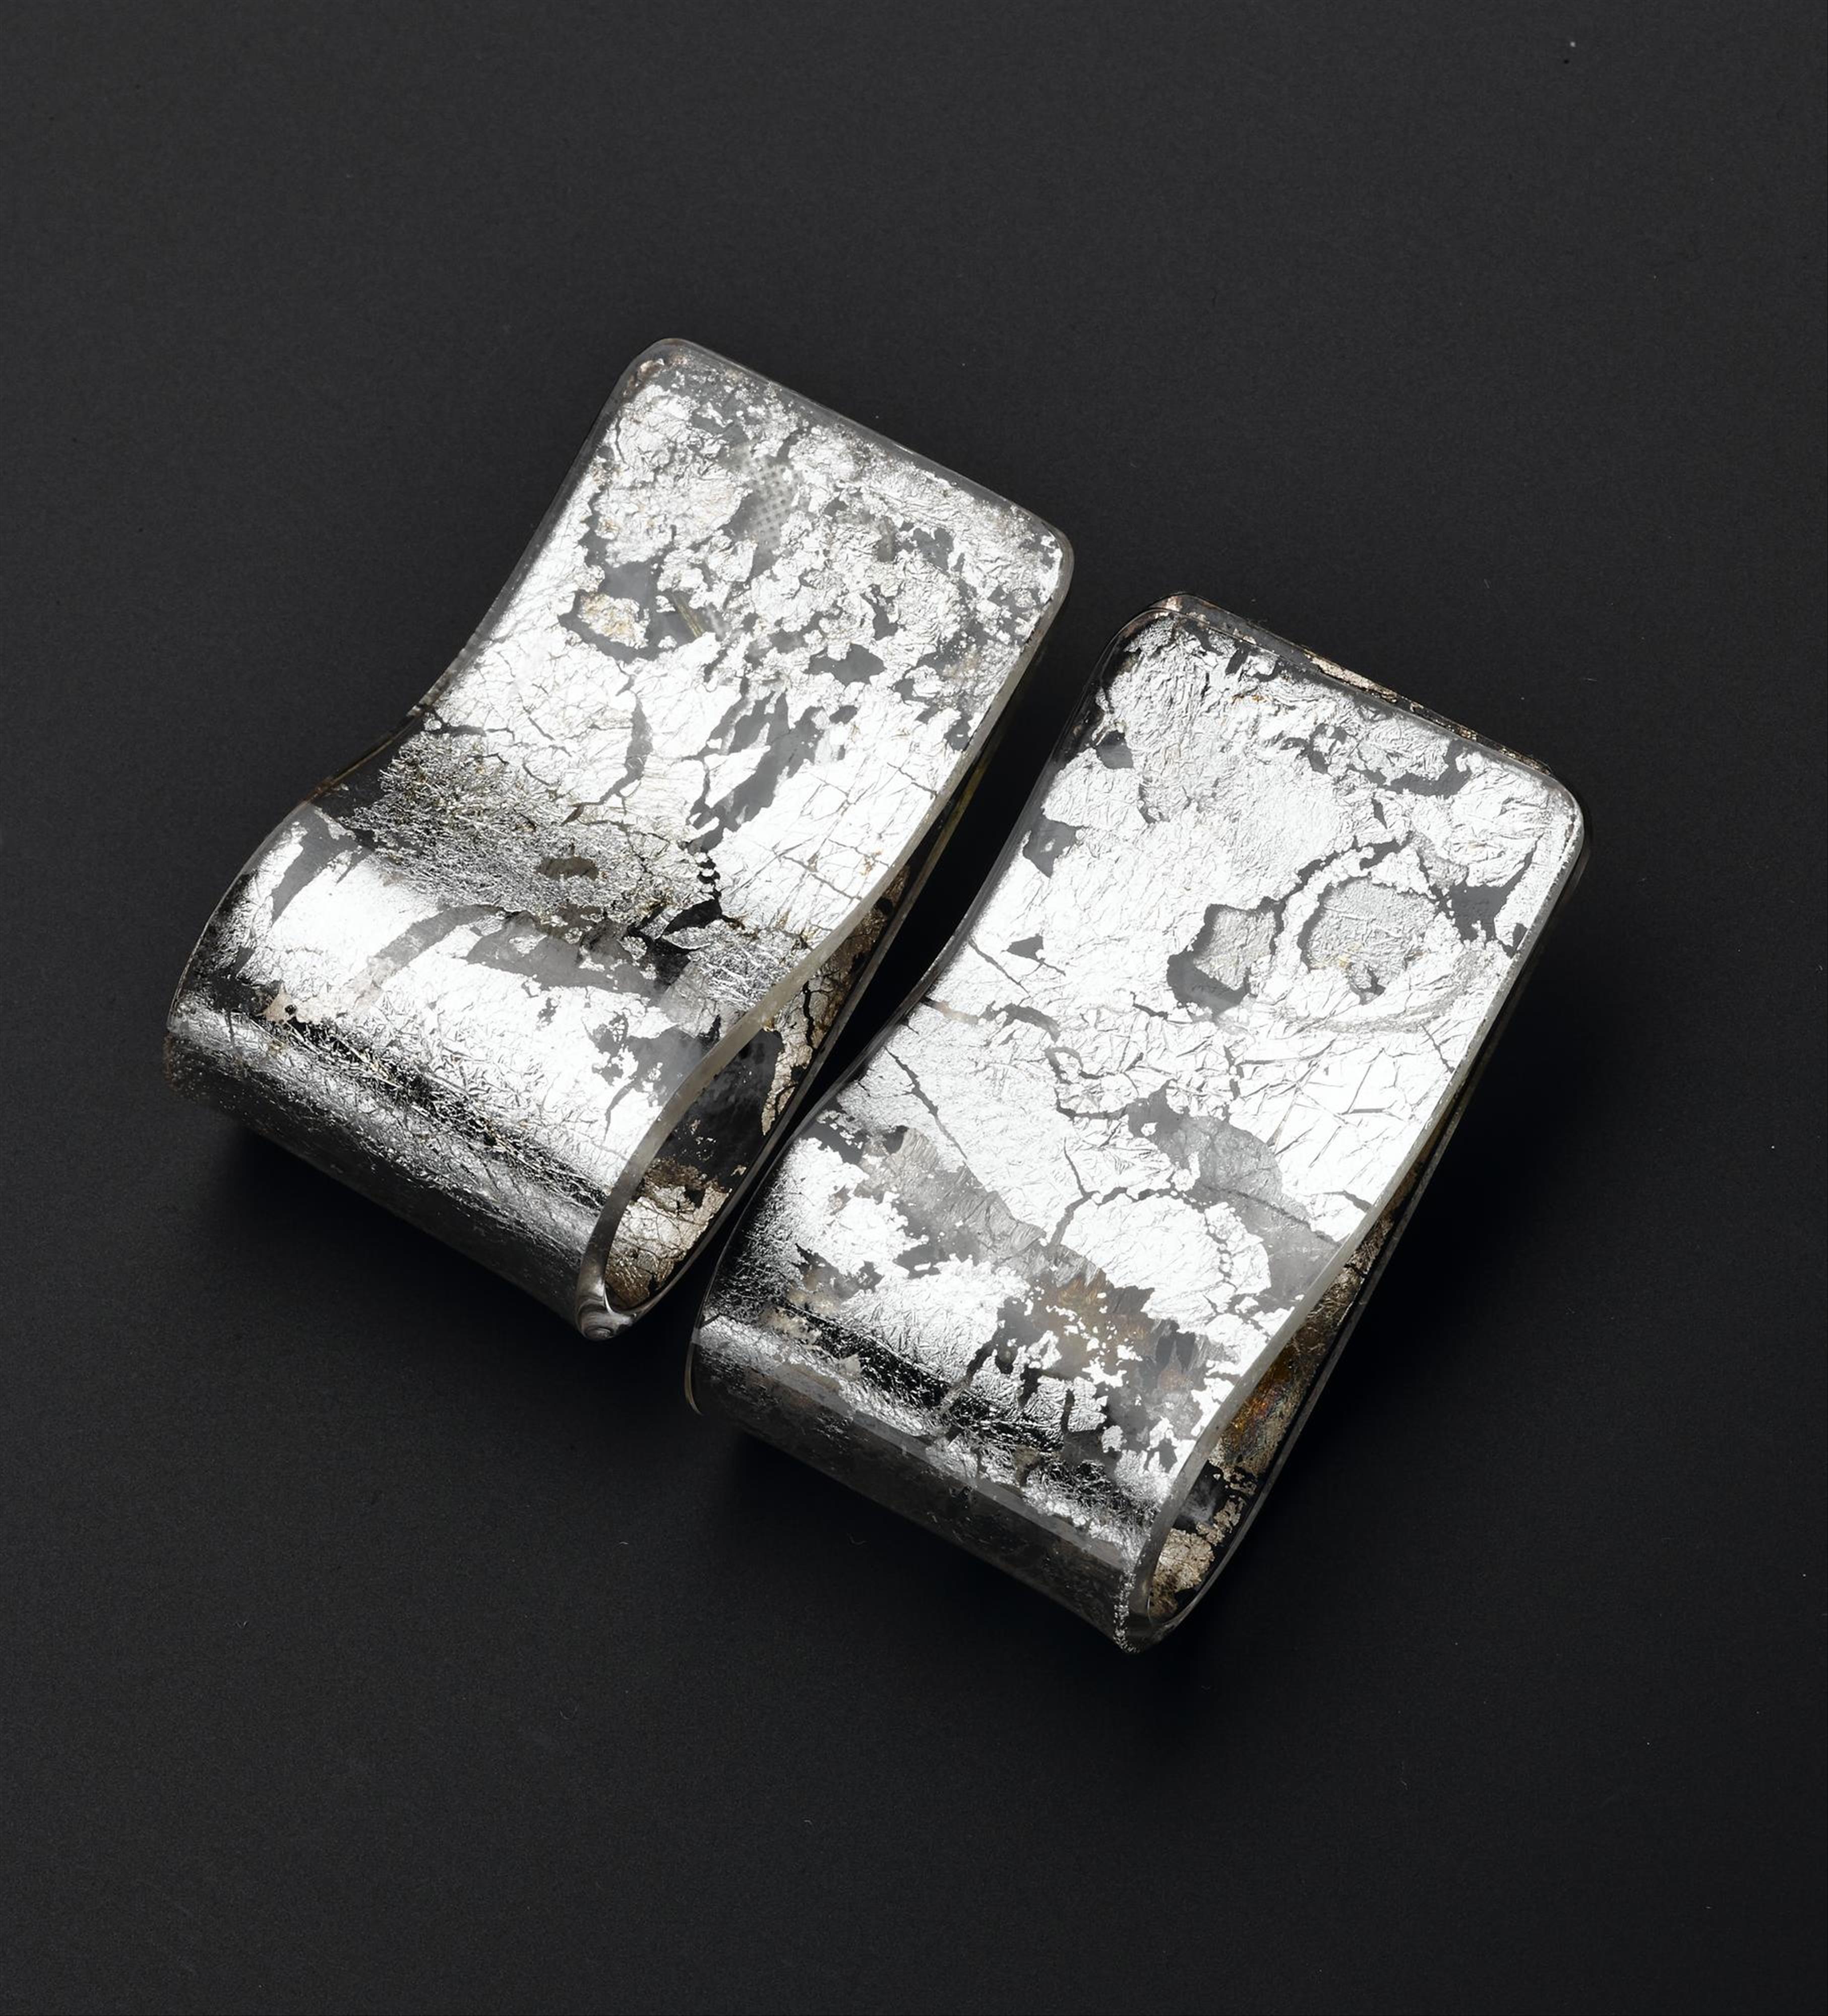 Clip-on earrings of transparent acrylic decorated with silver leaf: British, designed and made for Jean Muir Ltd by C & N Buttons & Jewellery Production, 1980s.